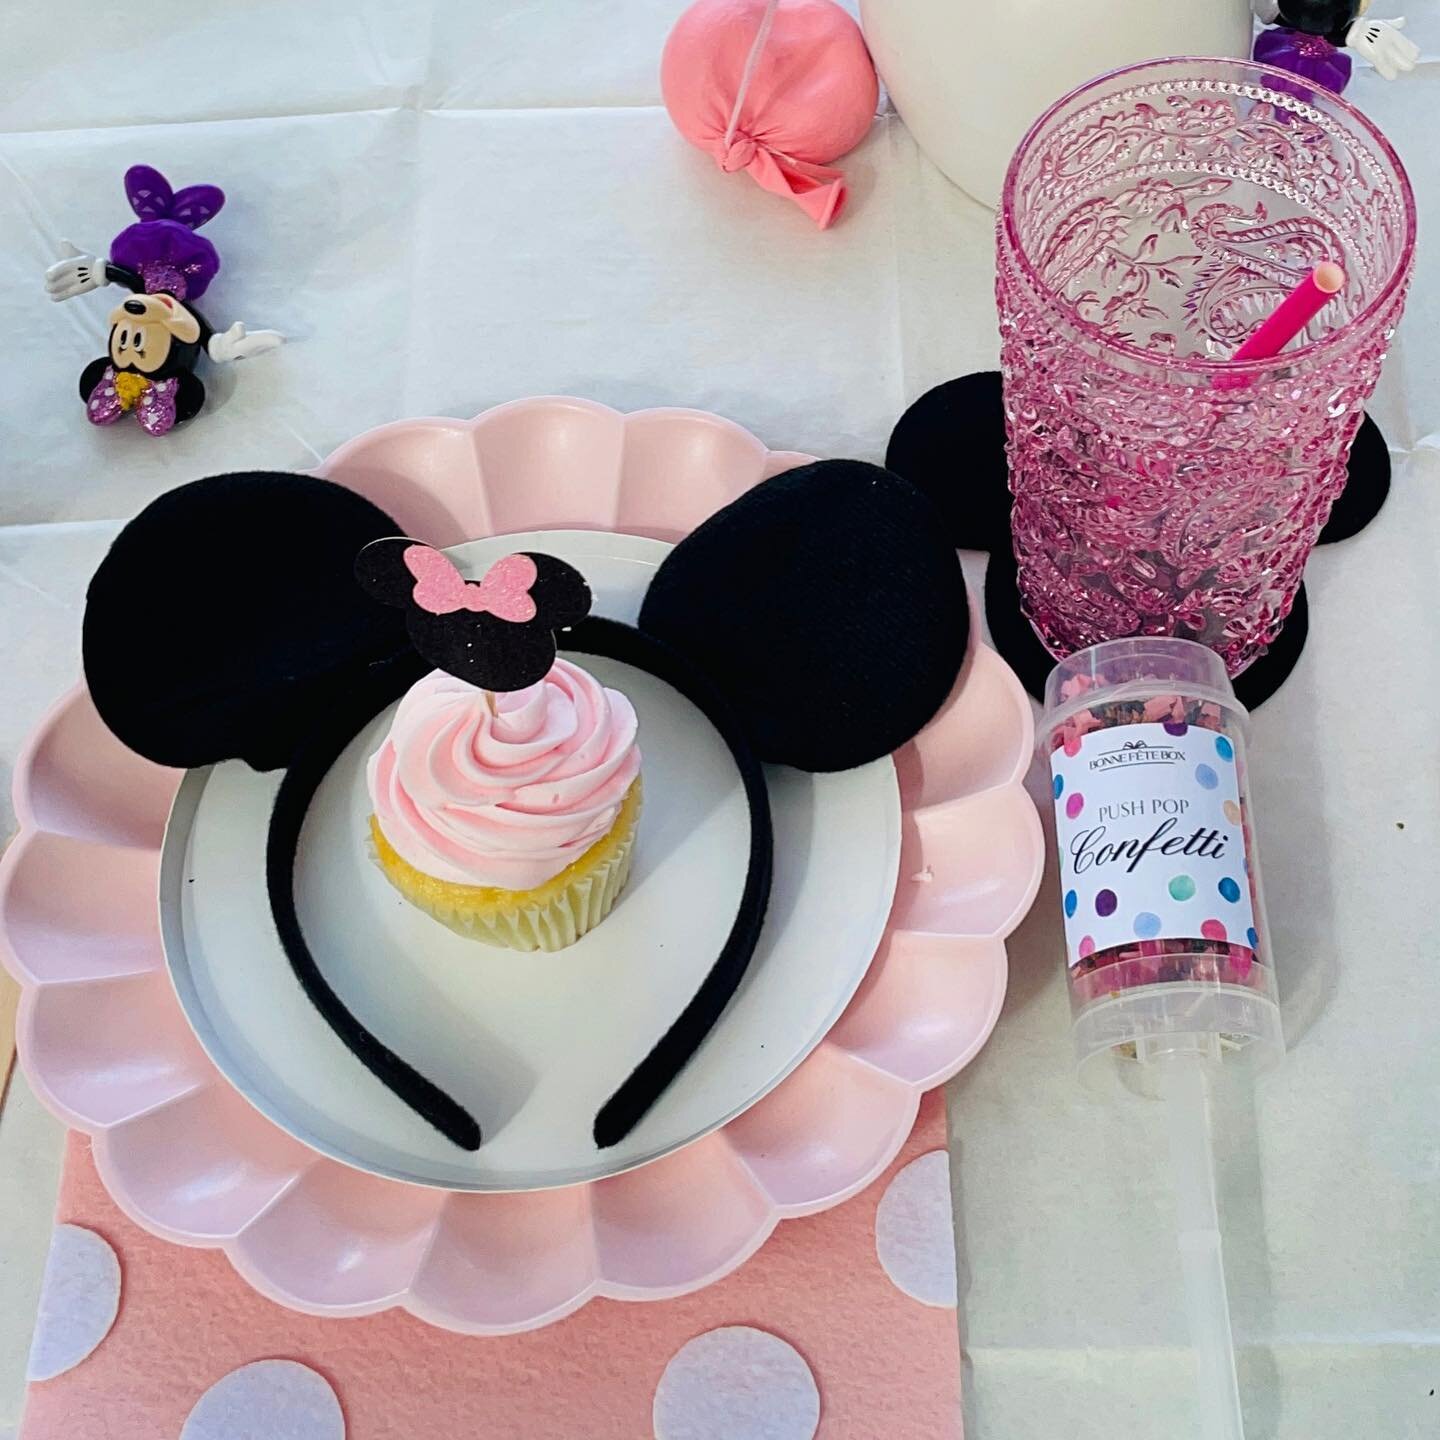 Each place setting was designed with:
custom felt chargers
pink scalloped plates
felt ears
Vanilla cupcakes with custom Minnie Mouse toppers
custom filled Confetti poppers
Acrylic Pink drinking cups &amp; more

Dm us to start planning your next party